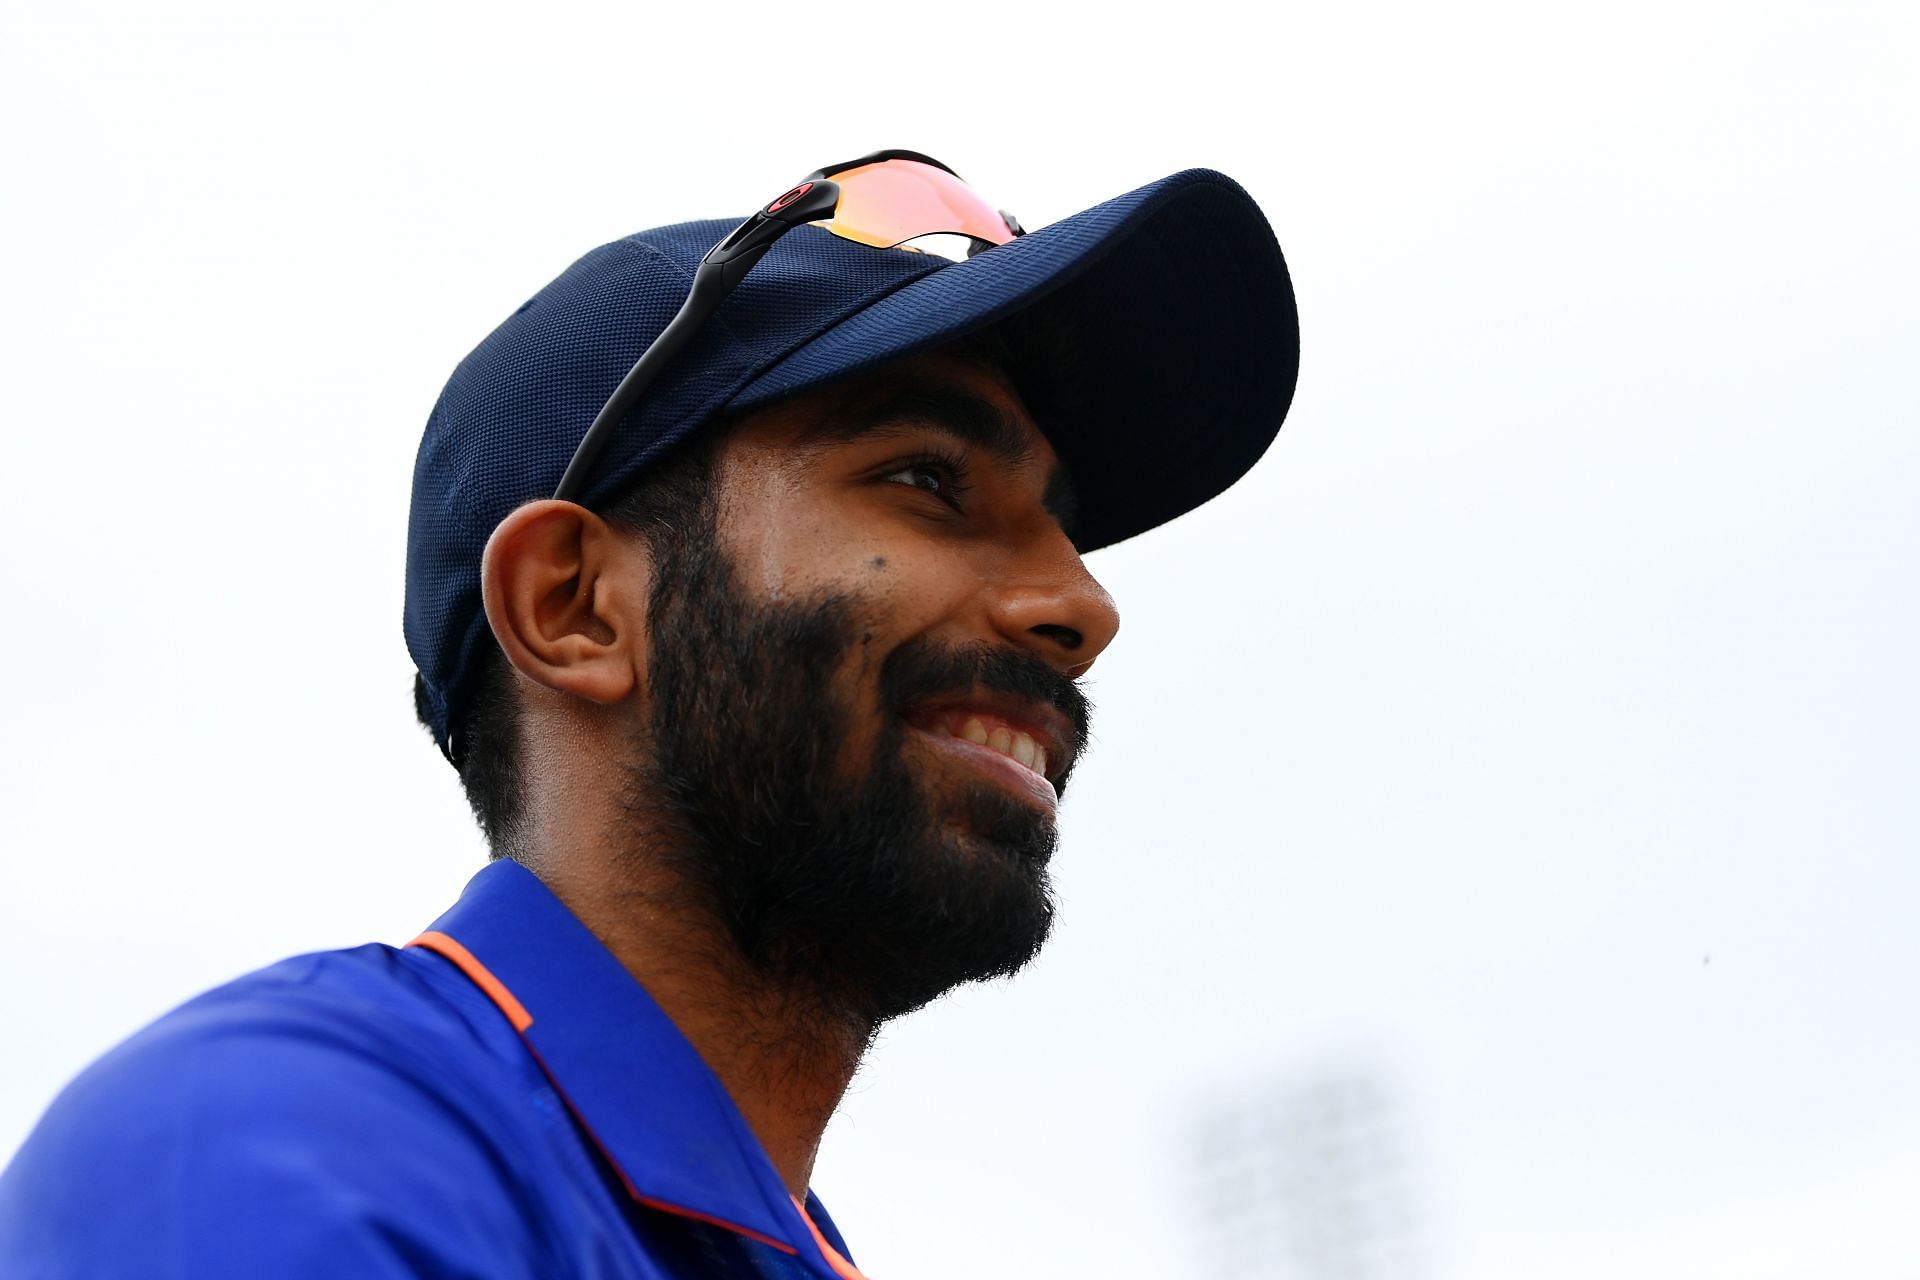 Jasprit Bumrah has replaced Trent Boult as the world number 1 ODI bowler (Image: Getty)